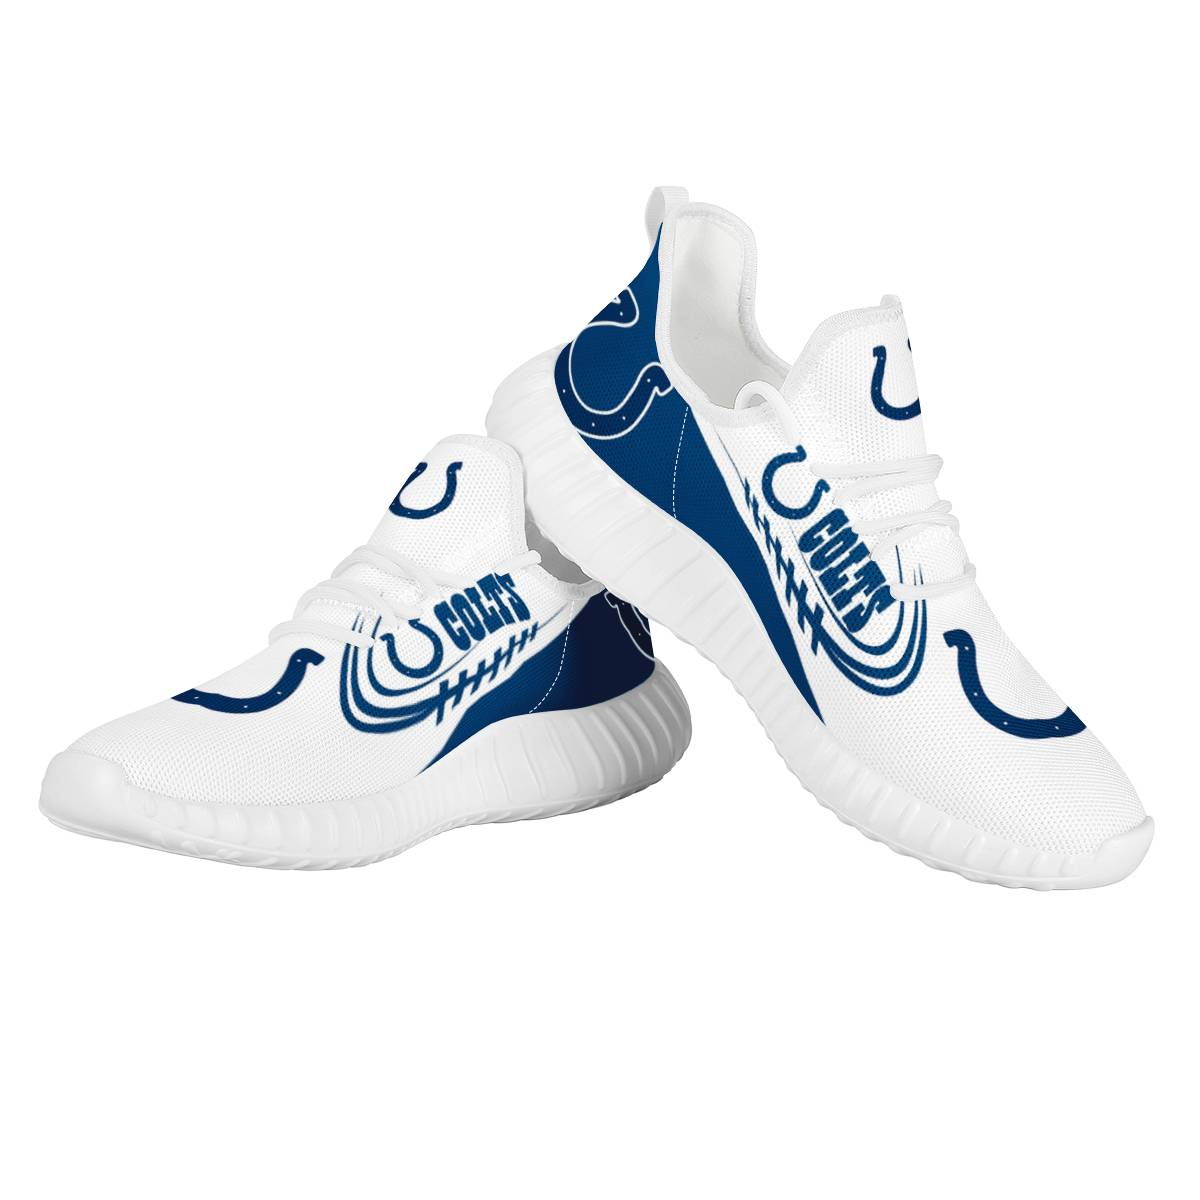 Men's Indianapolis Colts Mesh Knit Sneakers/Shoes 004